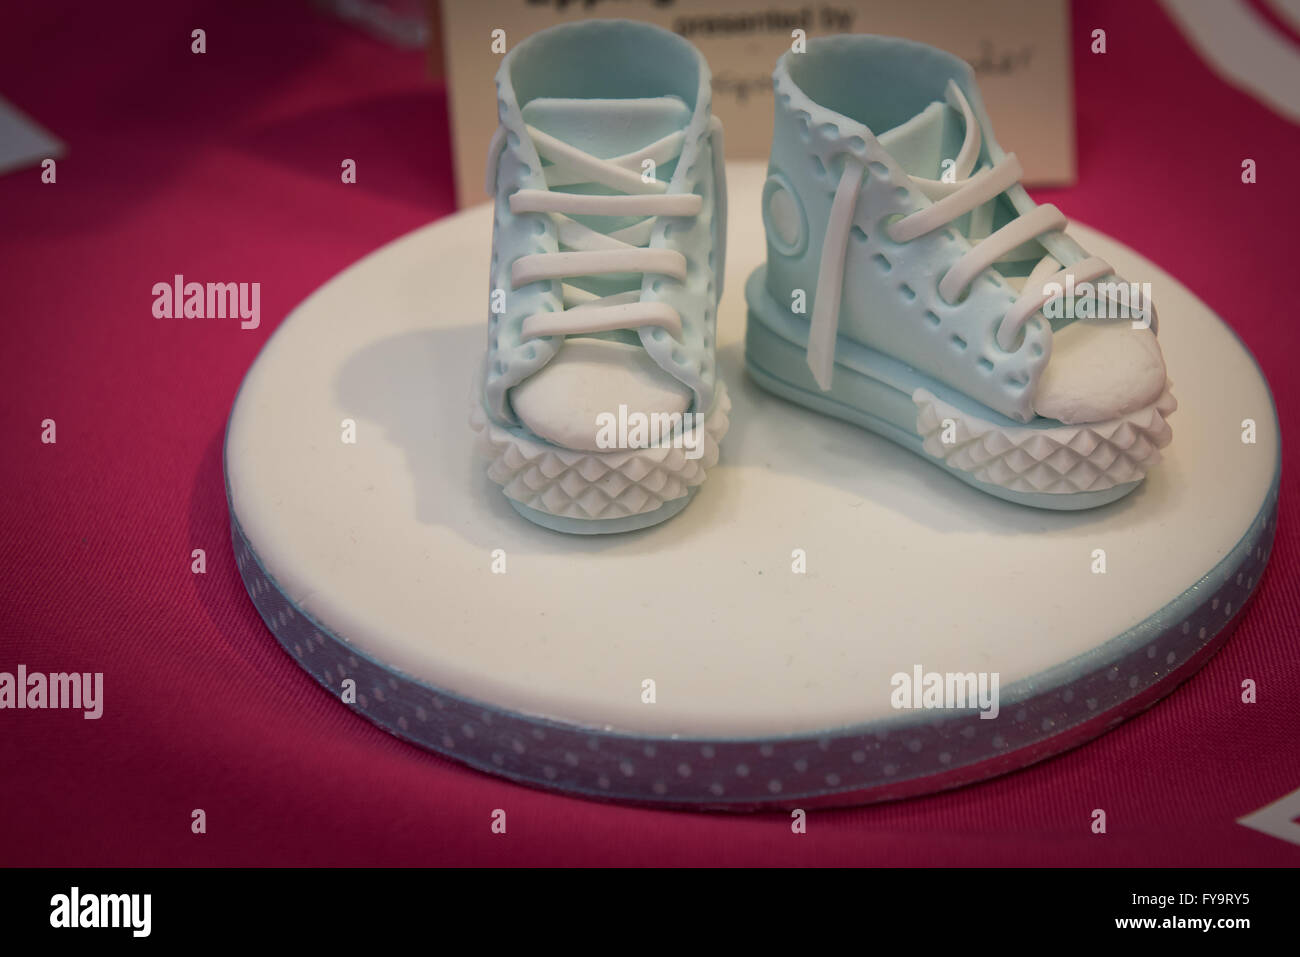 Baby shower cake boy blue shoes edible at Cake International – The Sugarcraft, Cake Decorating and Baking Show in London. Stock Photo